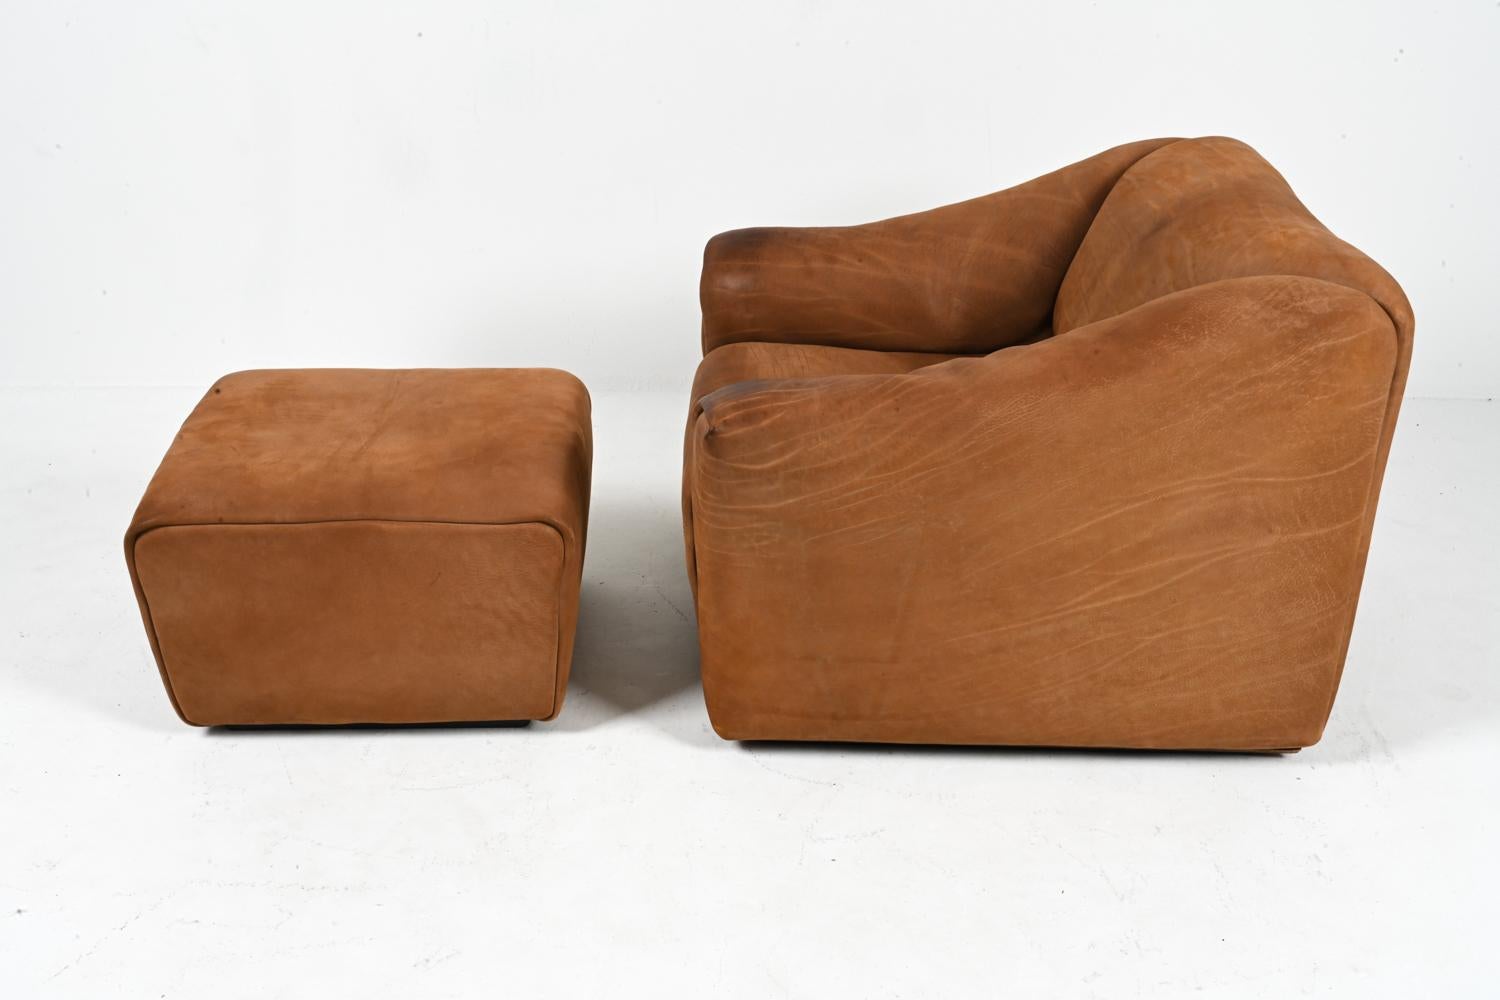 De Sede DS-47 Lounge Chair & Ottoman in Nubuck Leather, c. 1970's For Sale 2